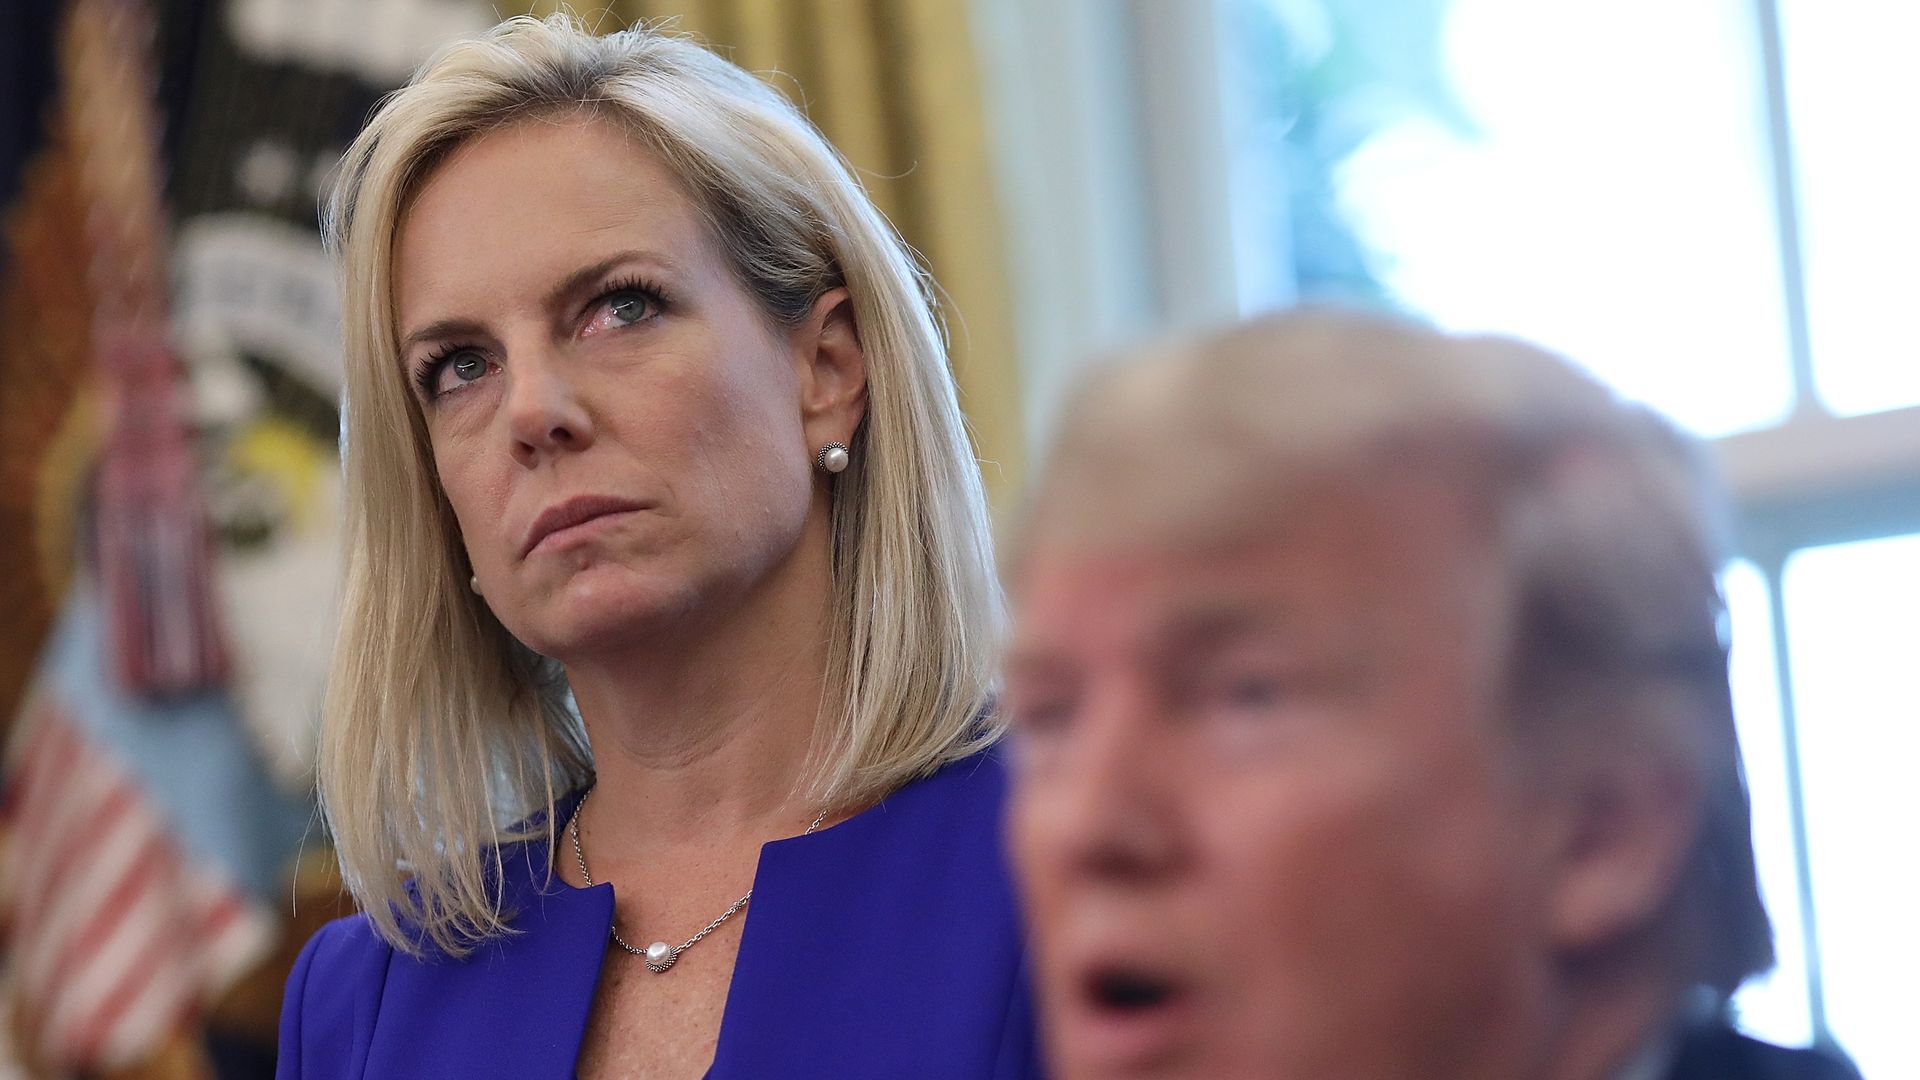 Secretary Nielsen, in focus and in purple looks sternly over Trump's head, who is not in focus